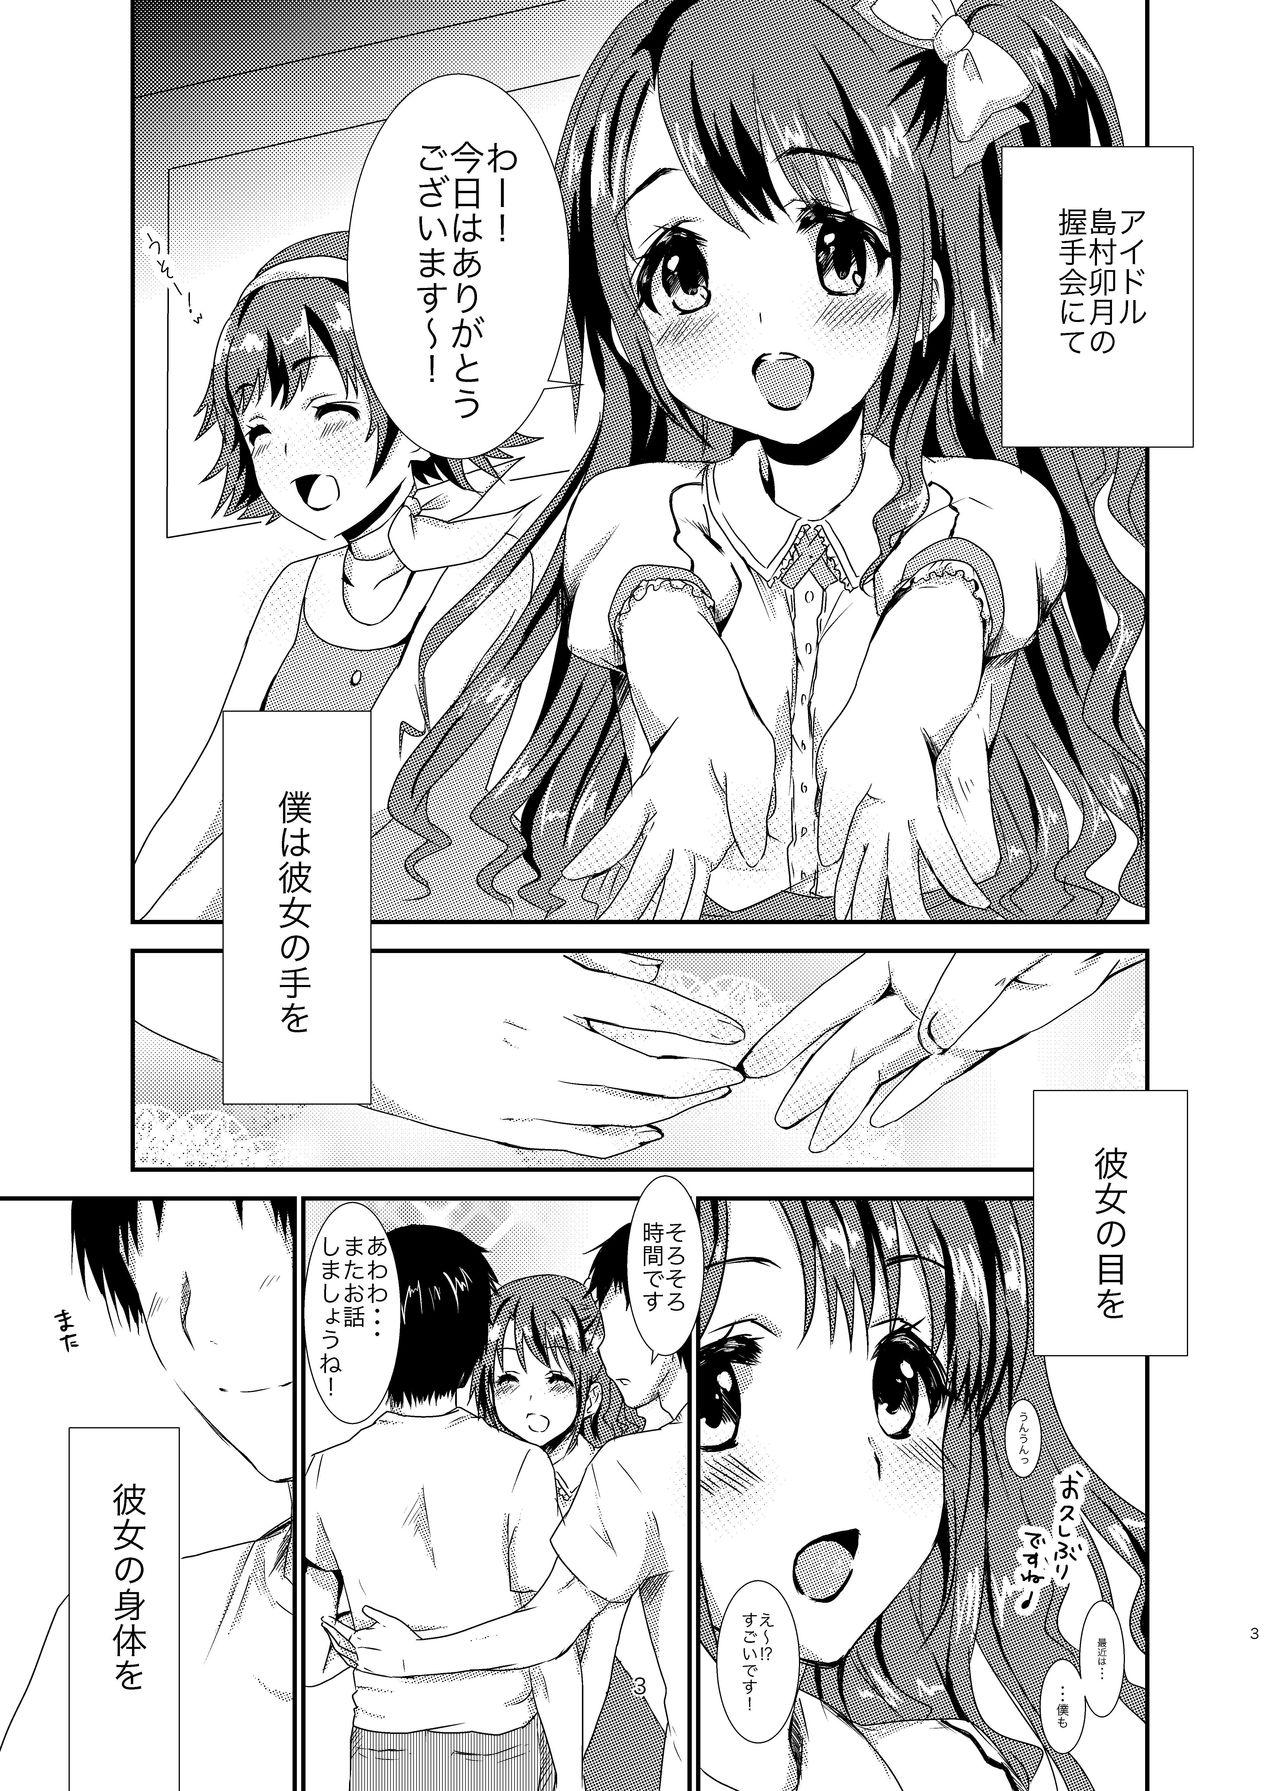 Gag office+love2 - The idolmaster Vintage - Page 2